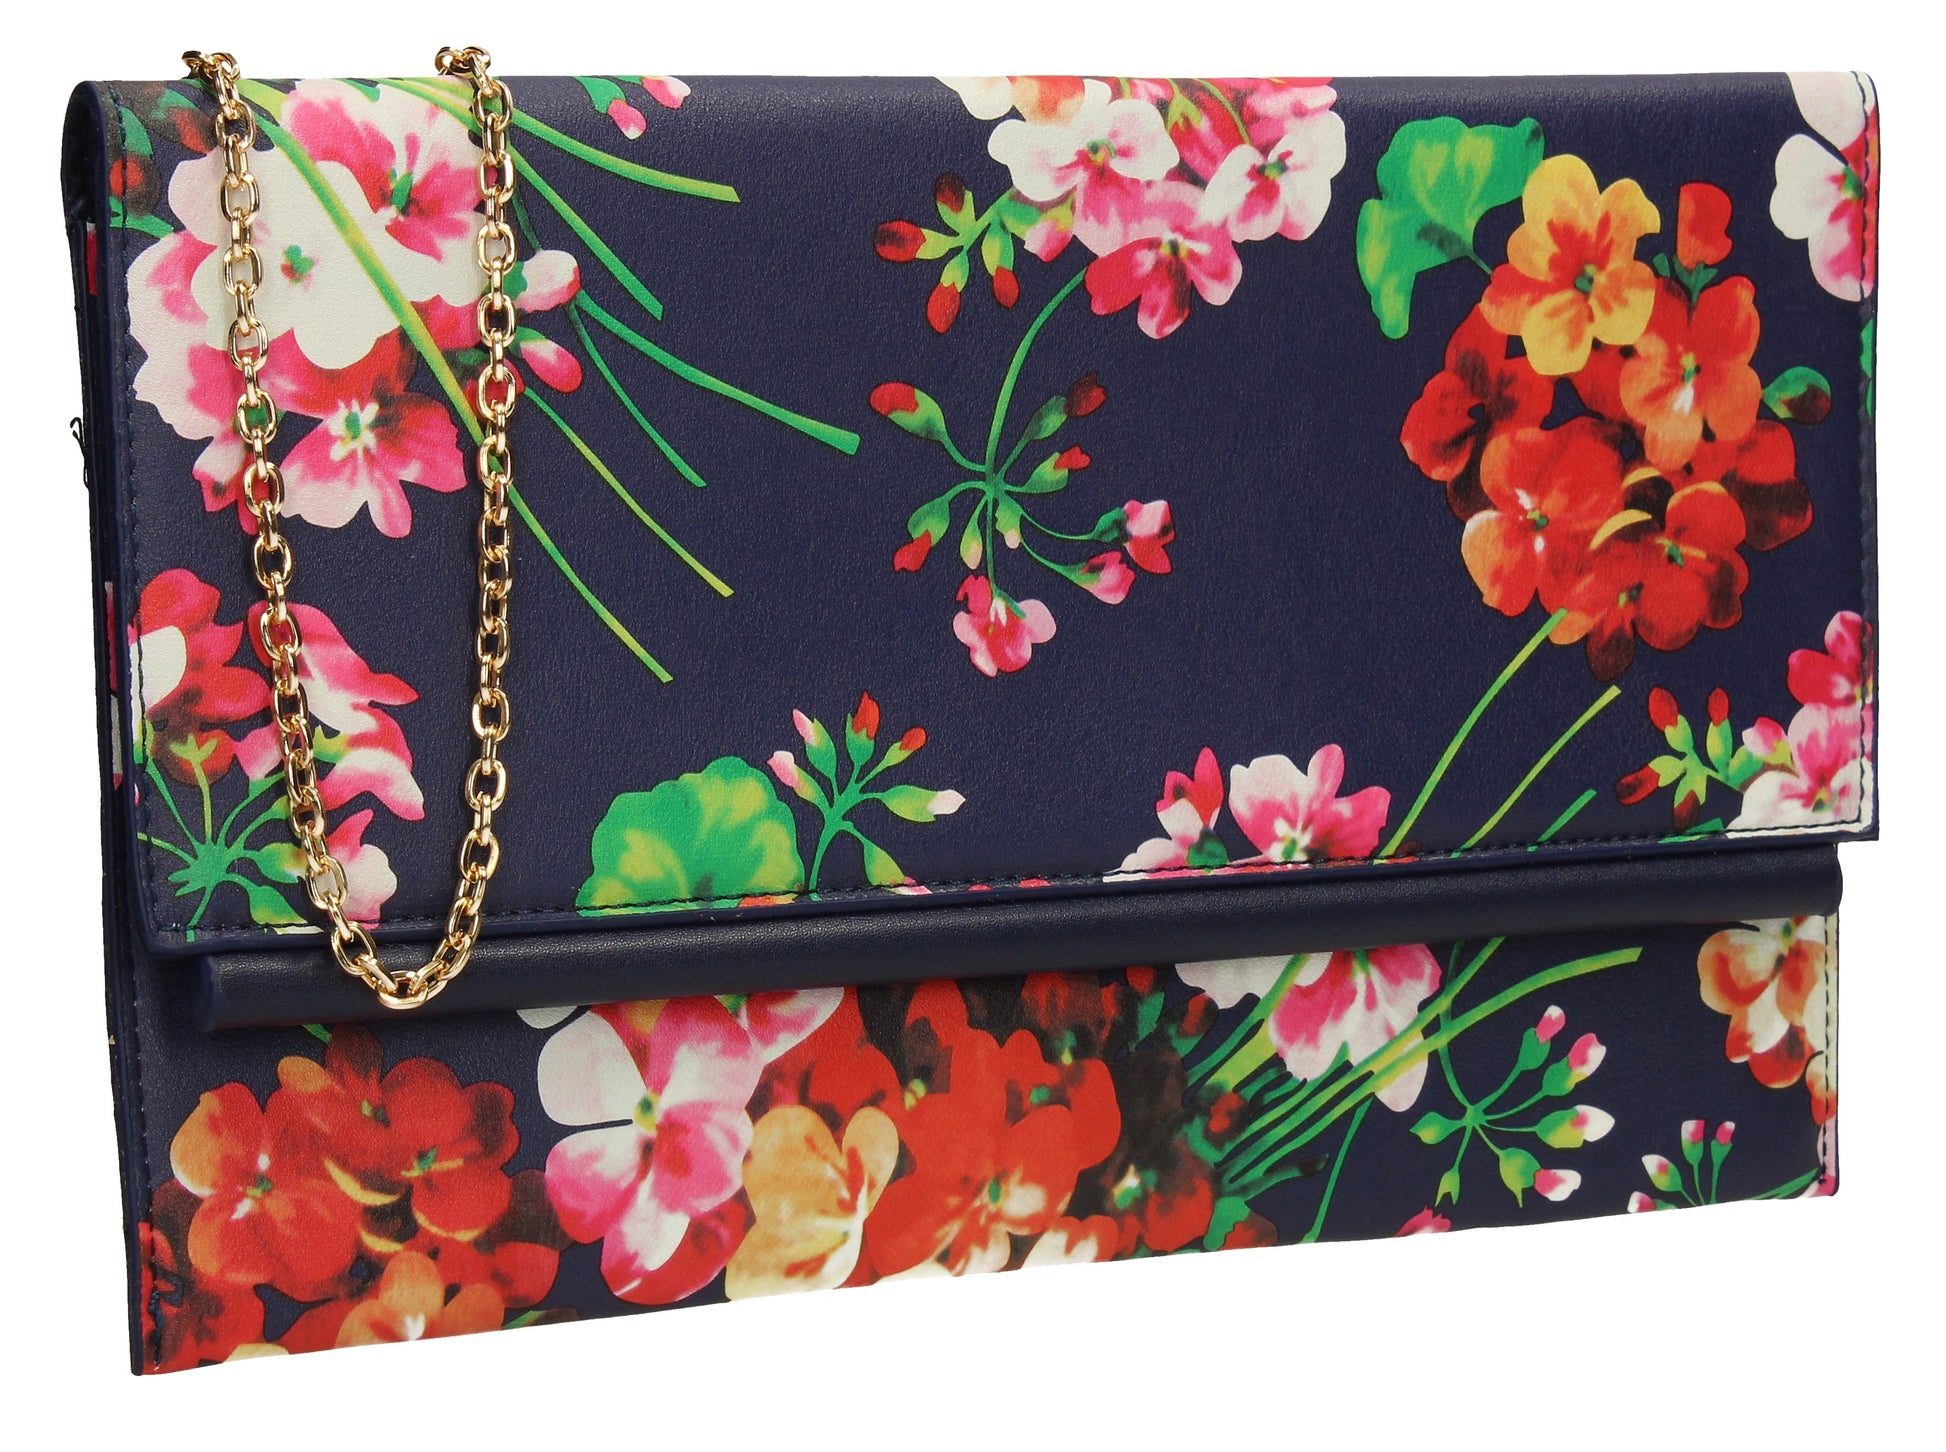 SWANKYSWANS Kate Floral Clutch Bag Navy Cute Cheap Clutch Bag For Weddings School and Work